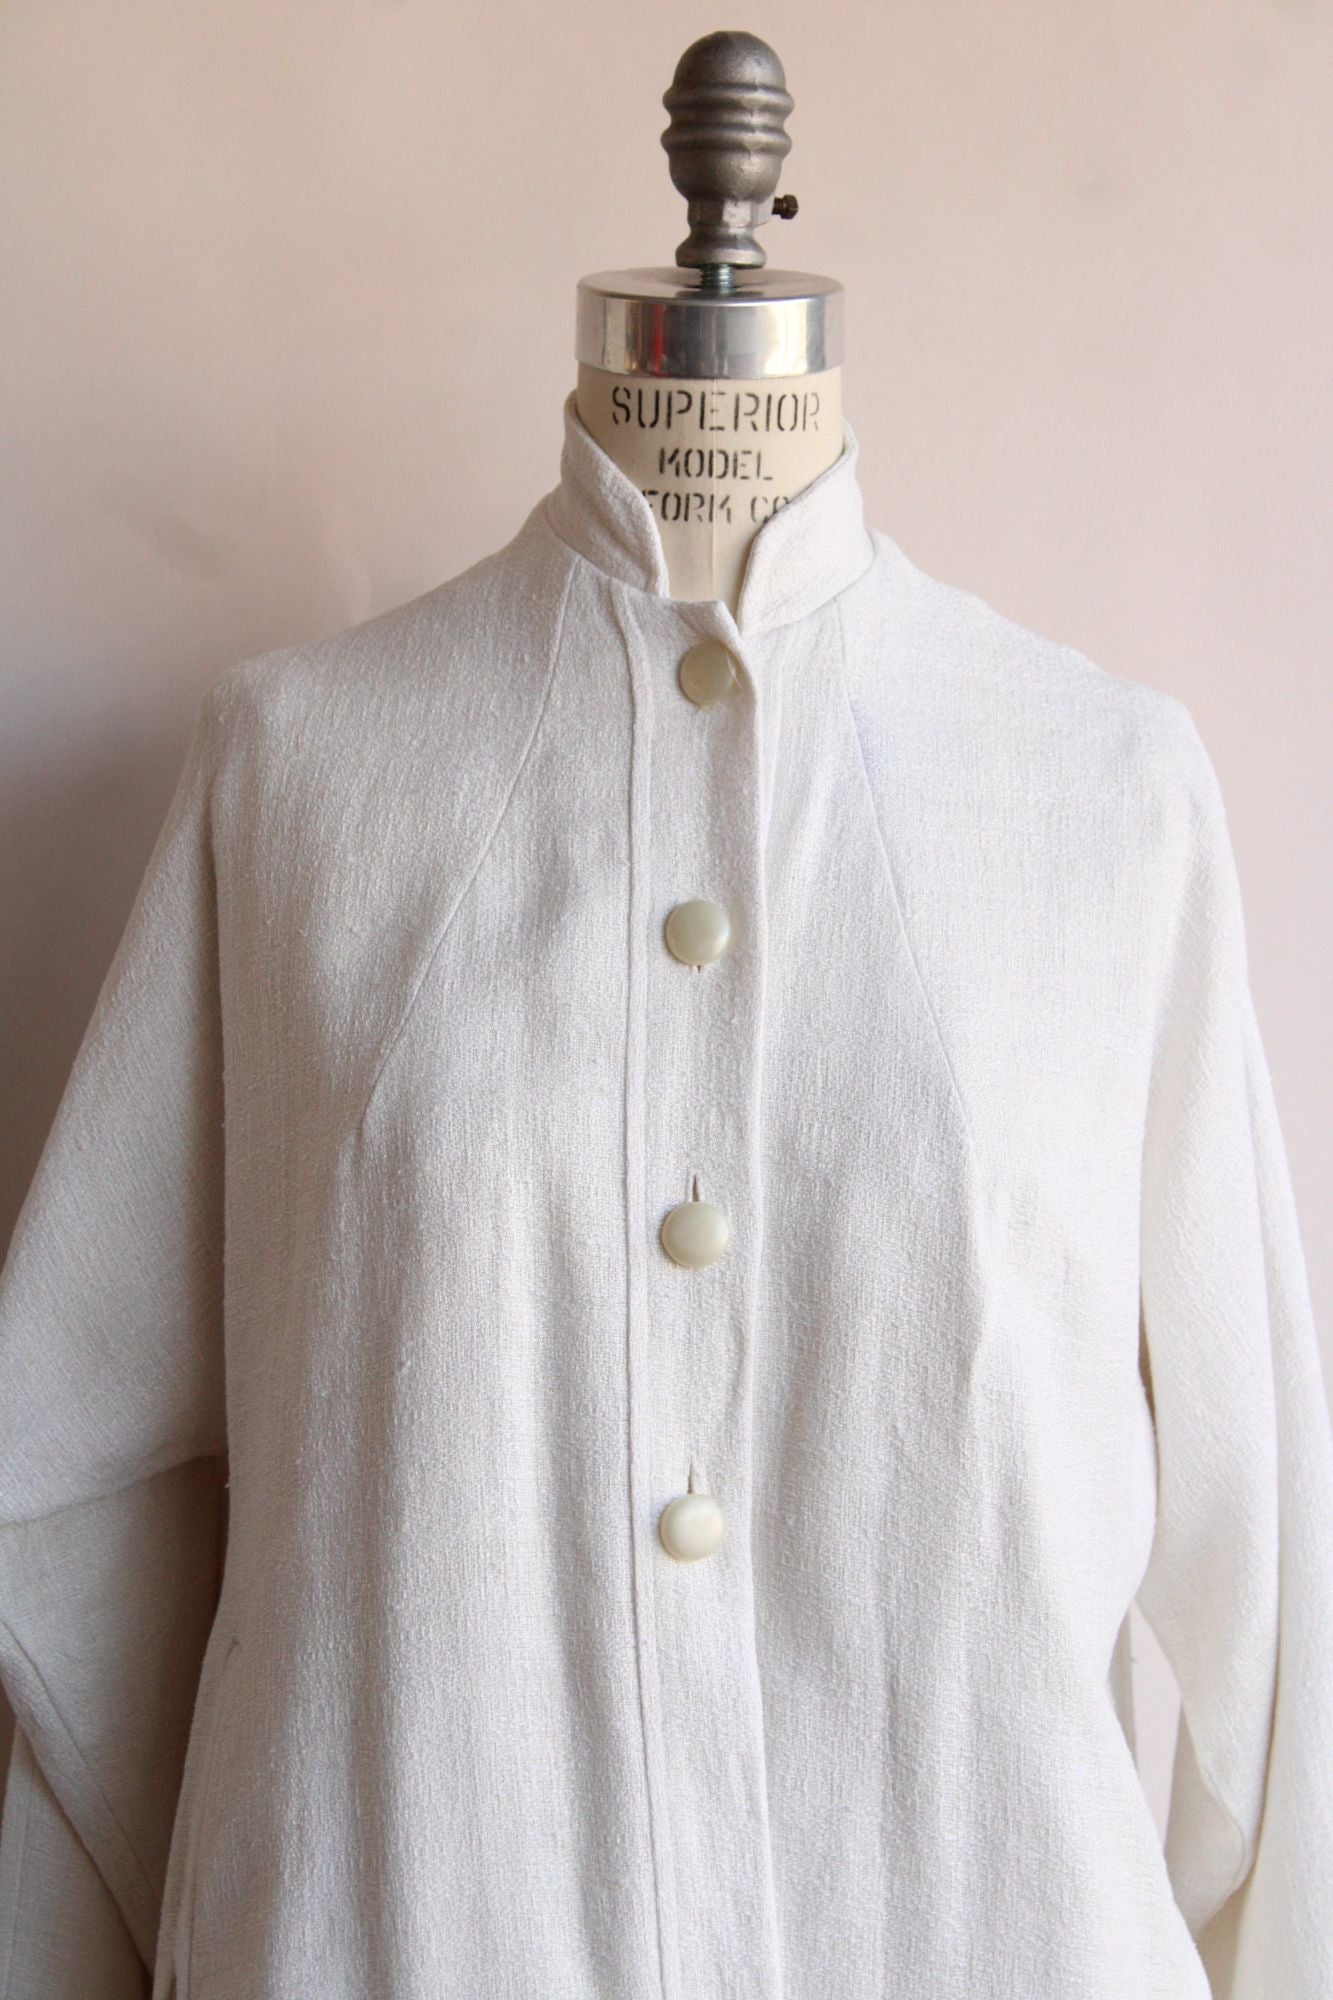 Vintage 1960s White Raw Silk Opera Jacket with Pockets and Buttons